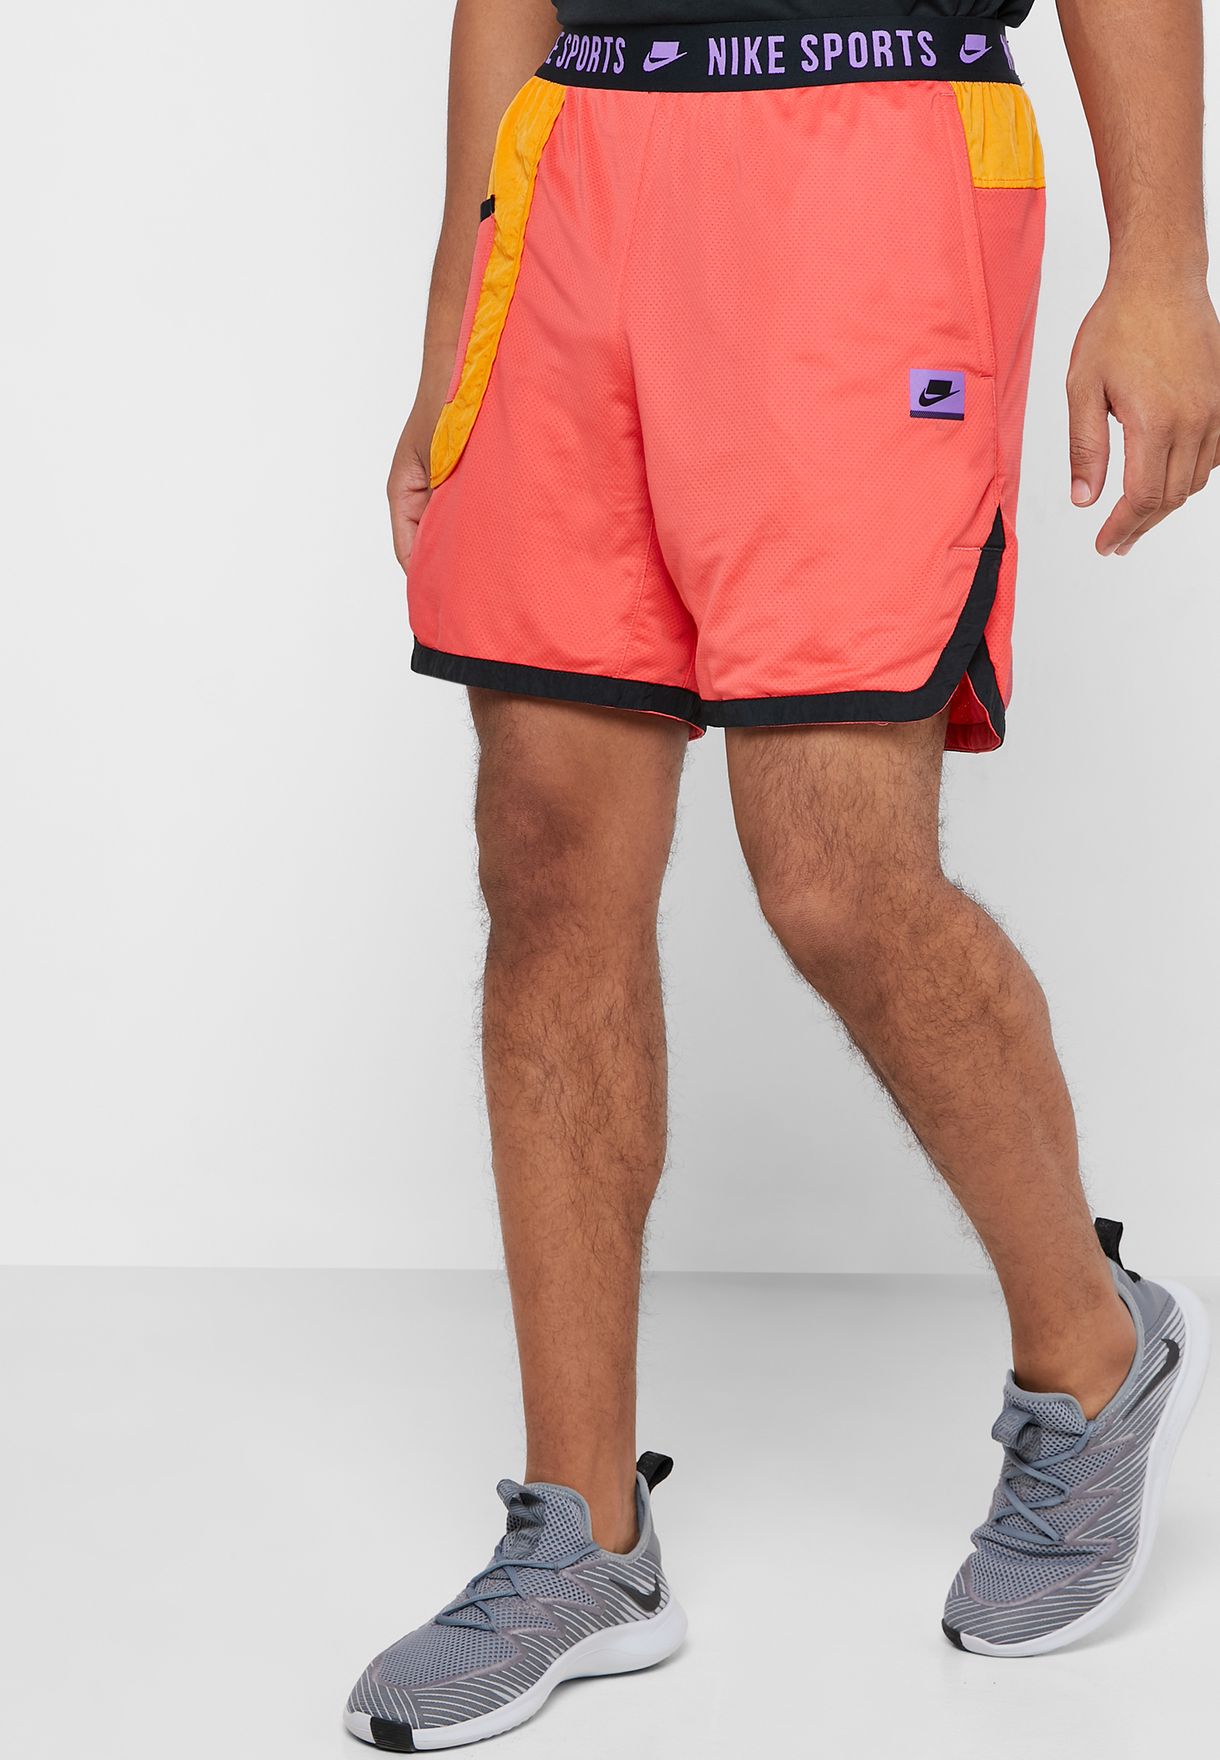 Buy Nike multicolor Dri-FIT Shorts for 